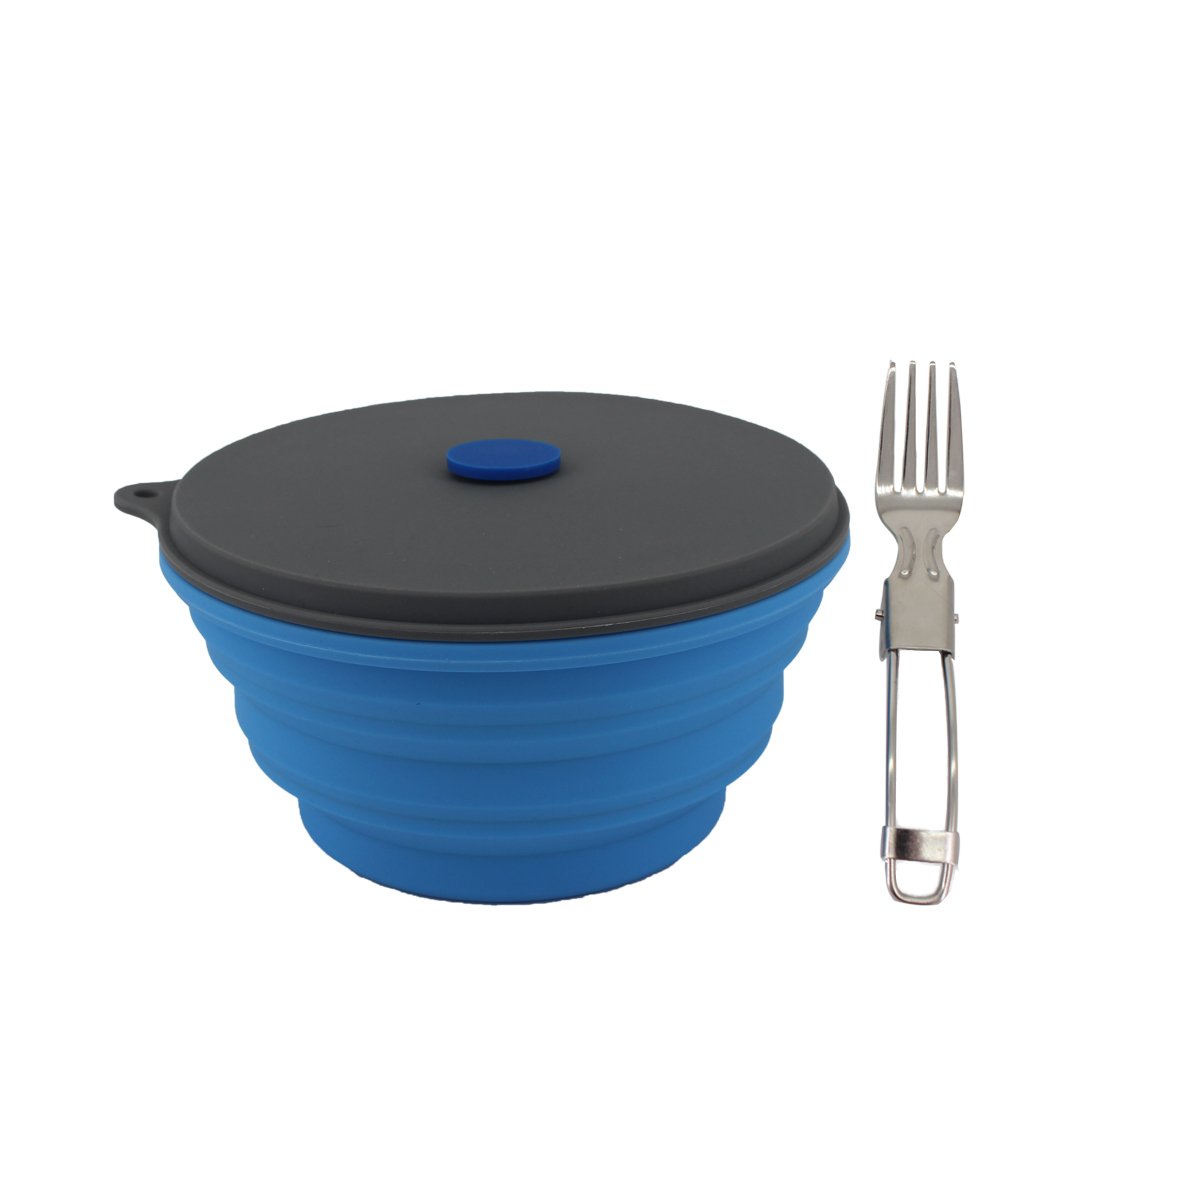 Camping Bowls With Lids, Foldable Silicone Collapsible Bowl, Lunch